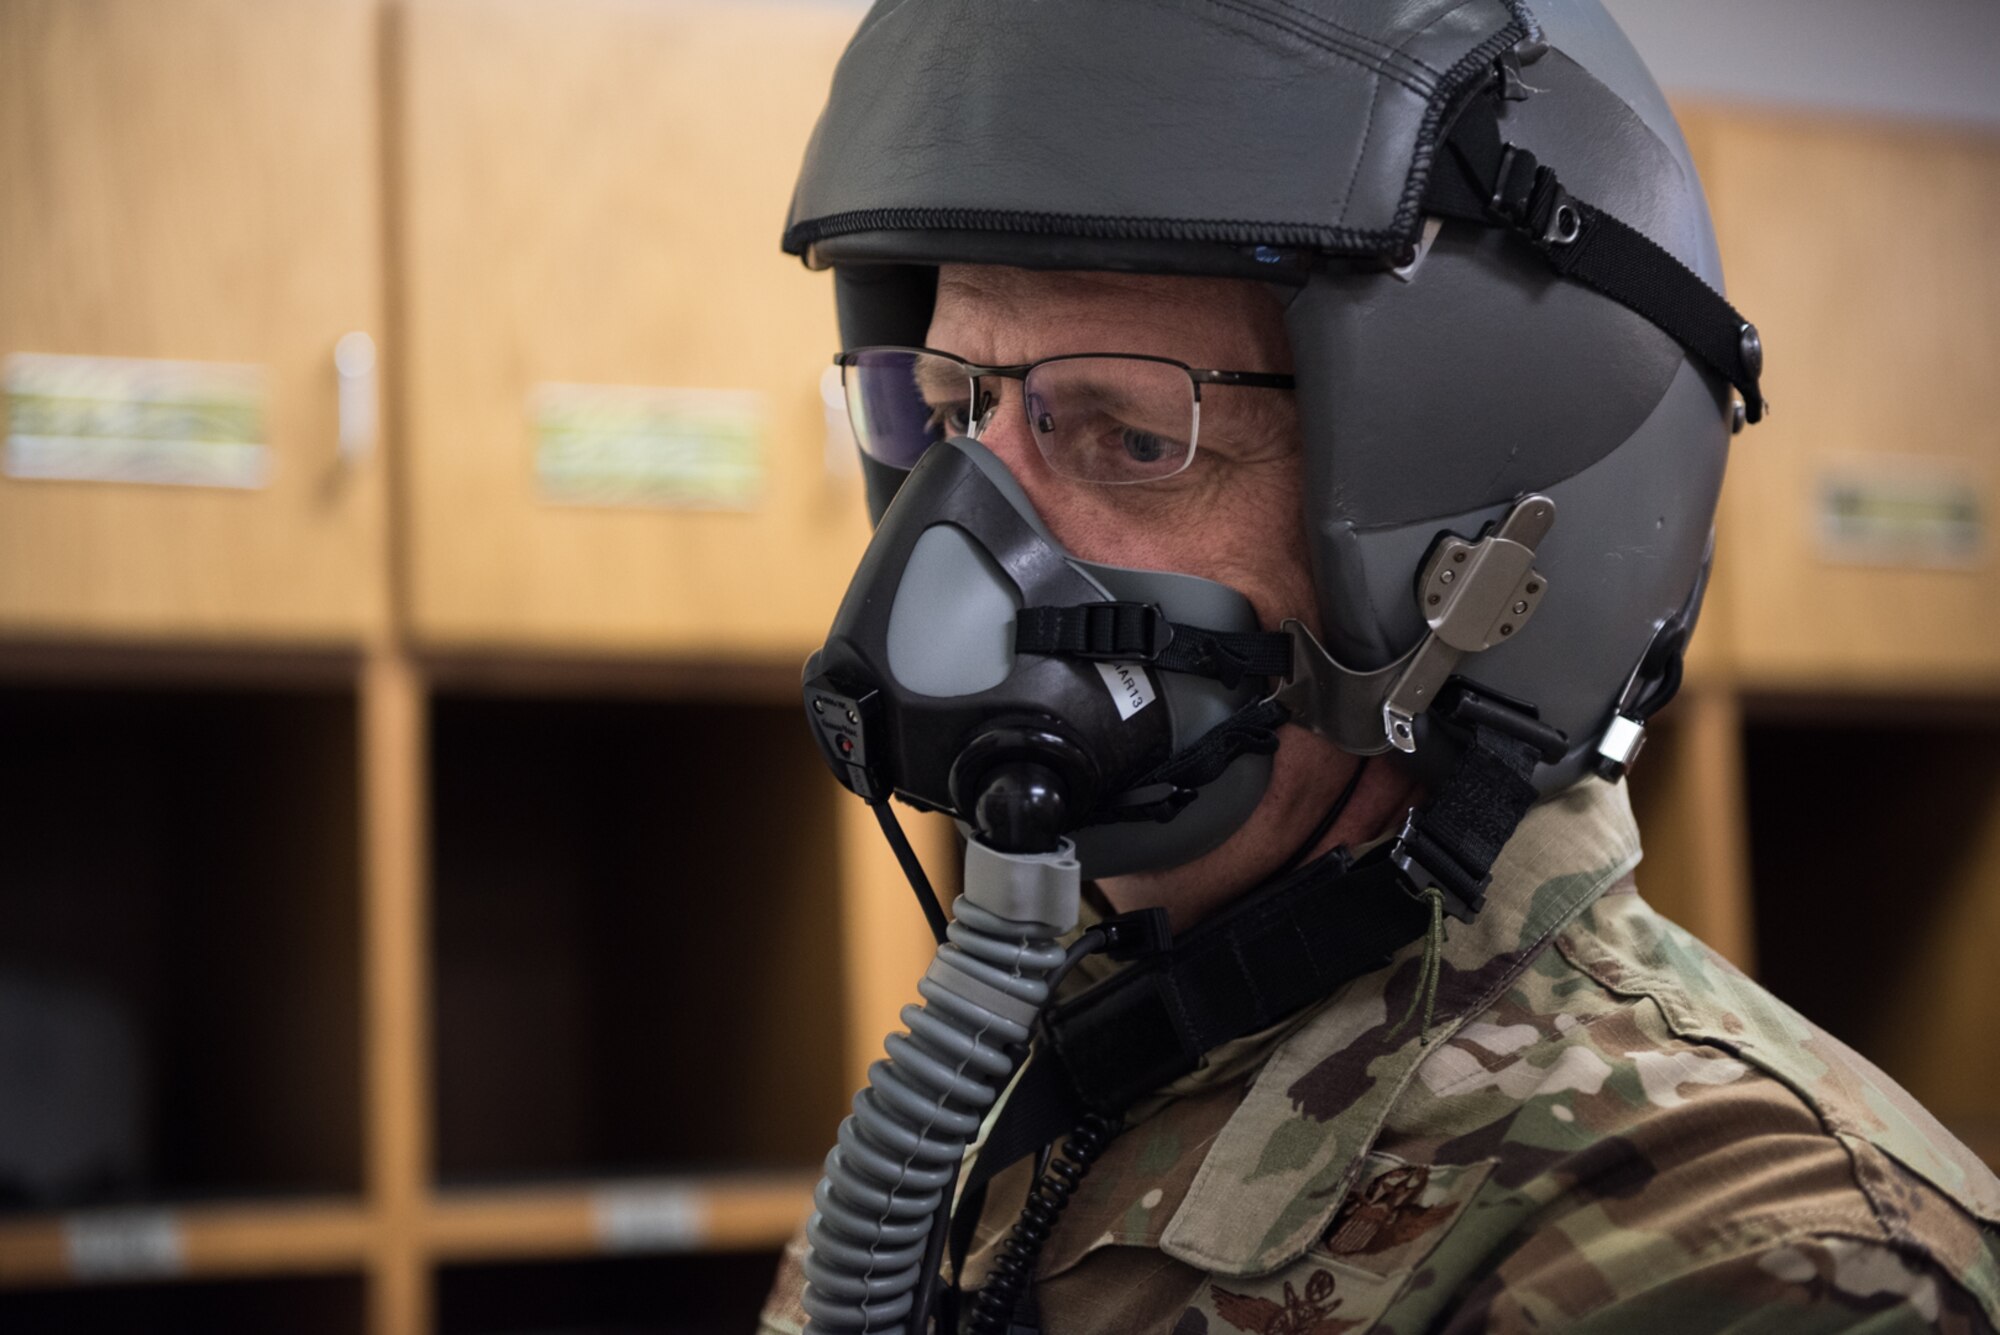 U.S. Air Force Maj. Gen. Mark Weatherington, 8th Air Force and Joint-Global Strike Operations Center commander, checks his flight helmet at Whiteman Air Force Base, Missouri, Aug. 24, 2020. Weatherington met with Airmen and leadership to discuss Team Whiteman’s role in the global strike and deterrence mission during a base familiarization and immersion tour. (U.S. Air Force photo by Airman 1st Class Christina Carter)